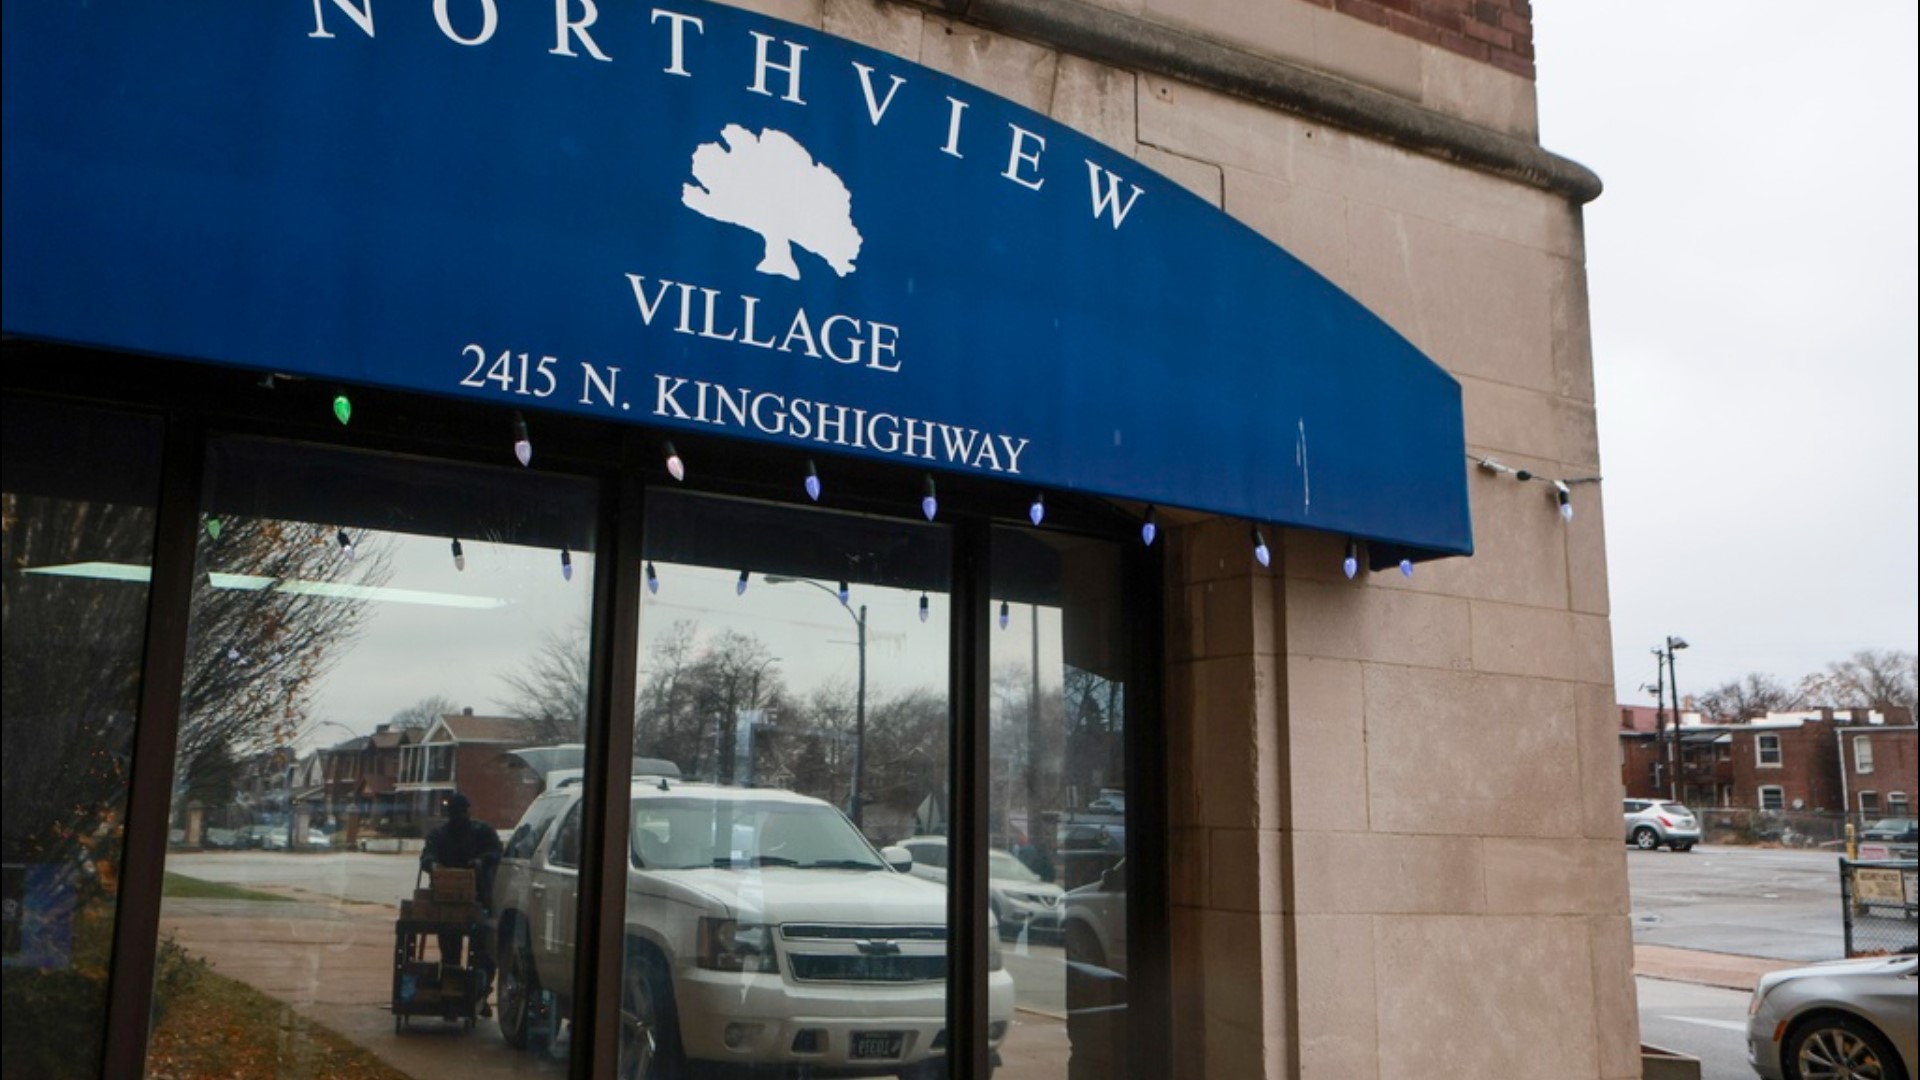 Northview Village closed suddenly on Dec. 15 as the company that owned it struggled to meet payroll. More than 170 residents were evacuated.